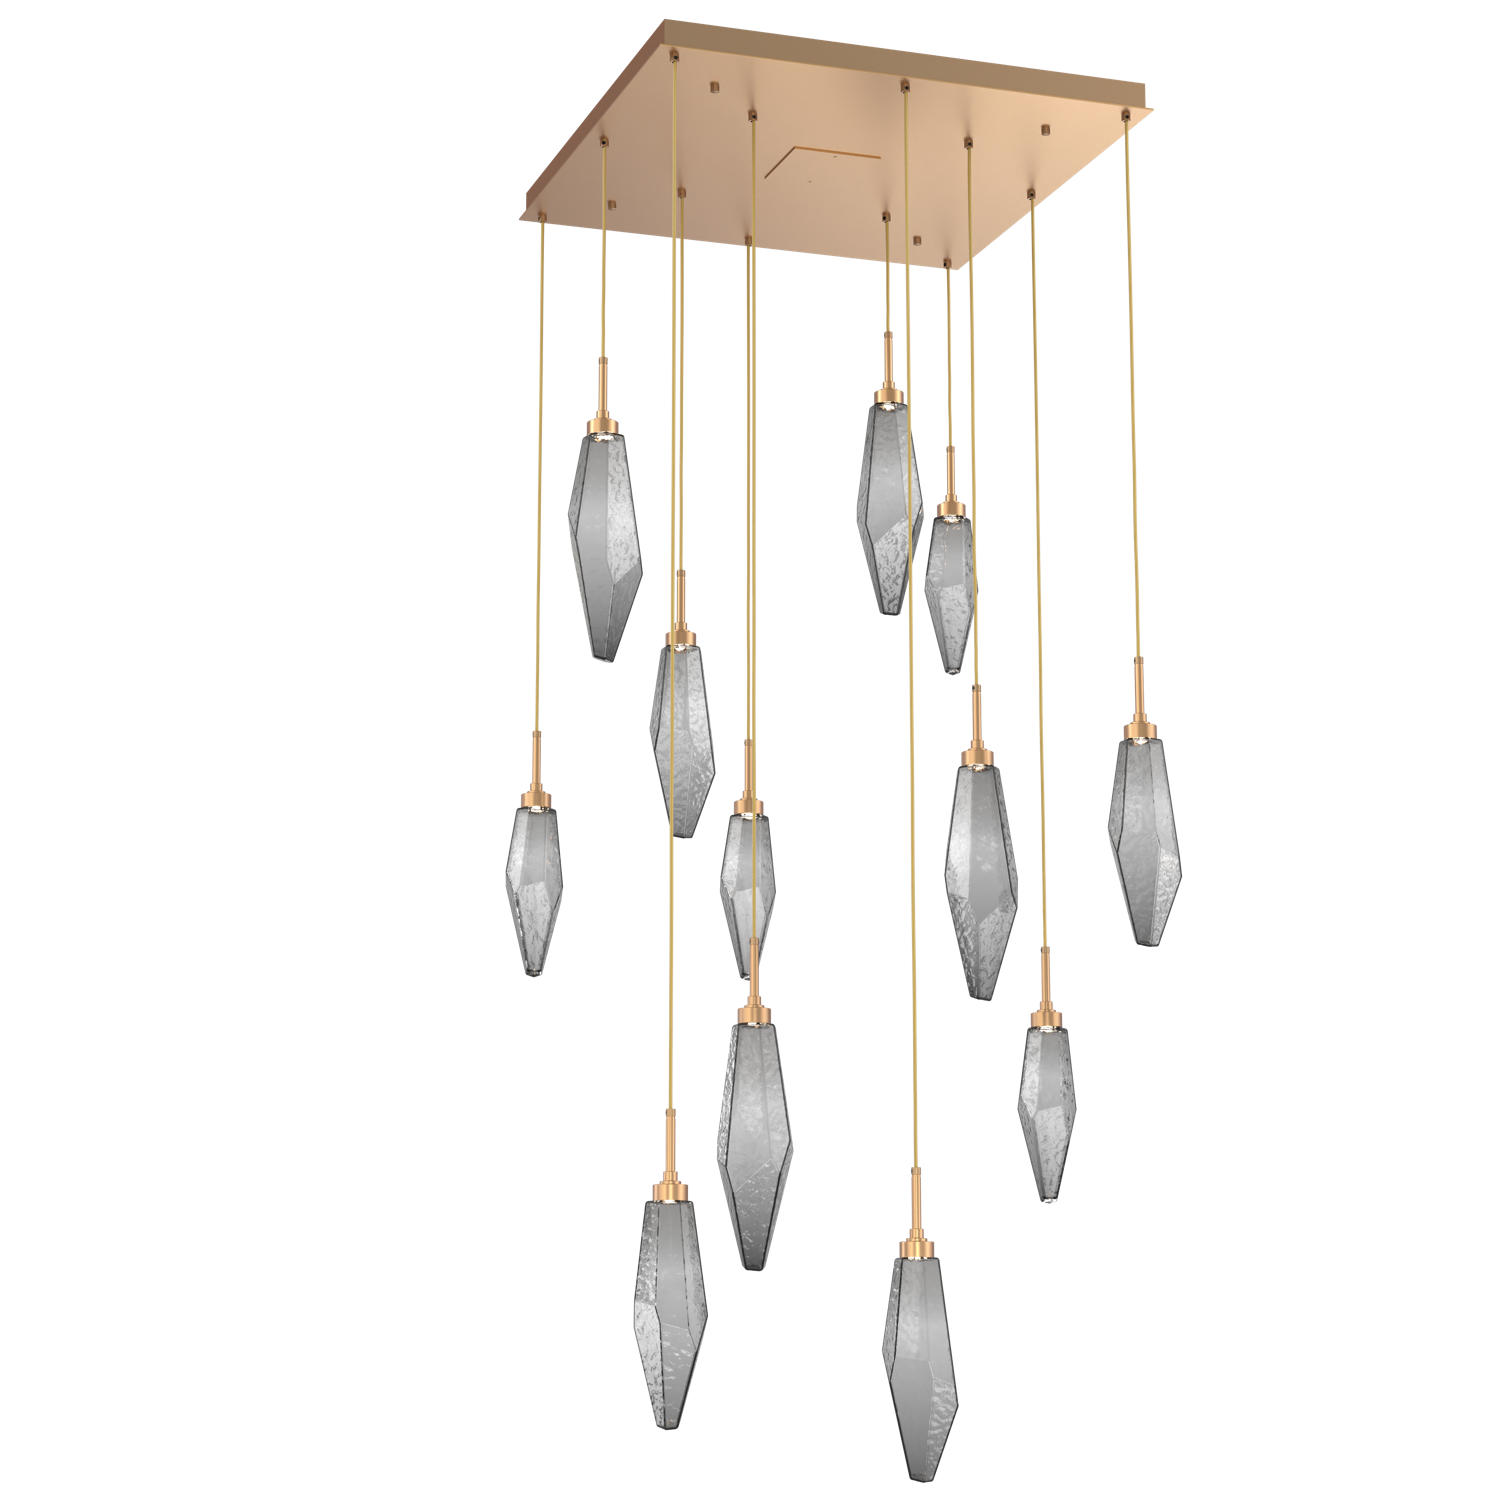 CHB0050-12-NB-CS-Hammerton-Studio-Rock-Crystal-12-light-square-pendant-chandelier-with-novel-brass-finish-and-chilled-smoke-glass-shades-and-LED-lamping